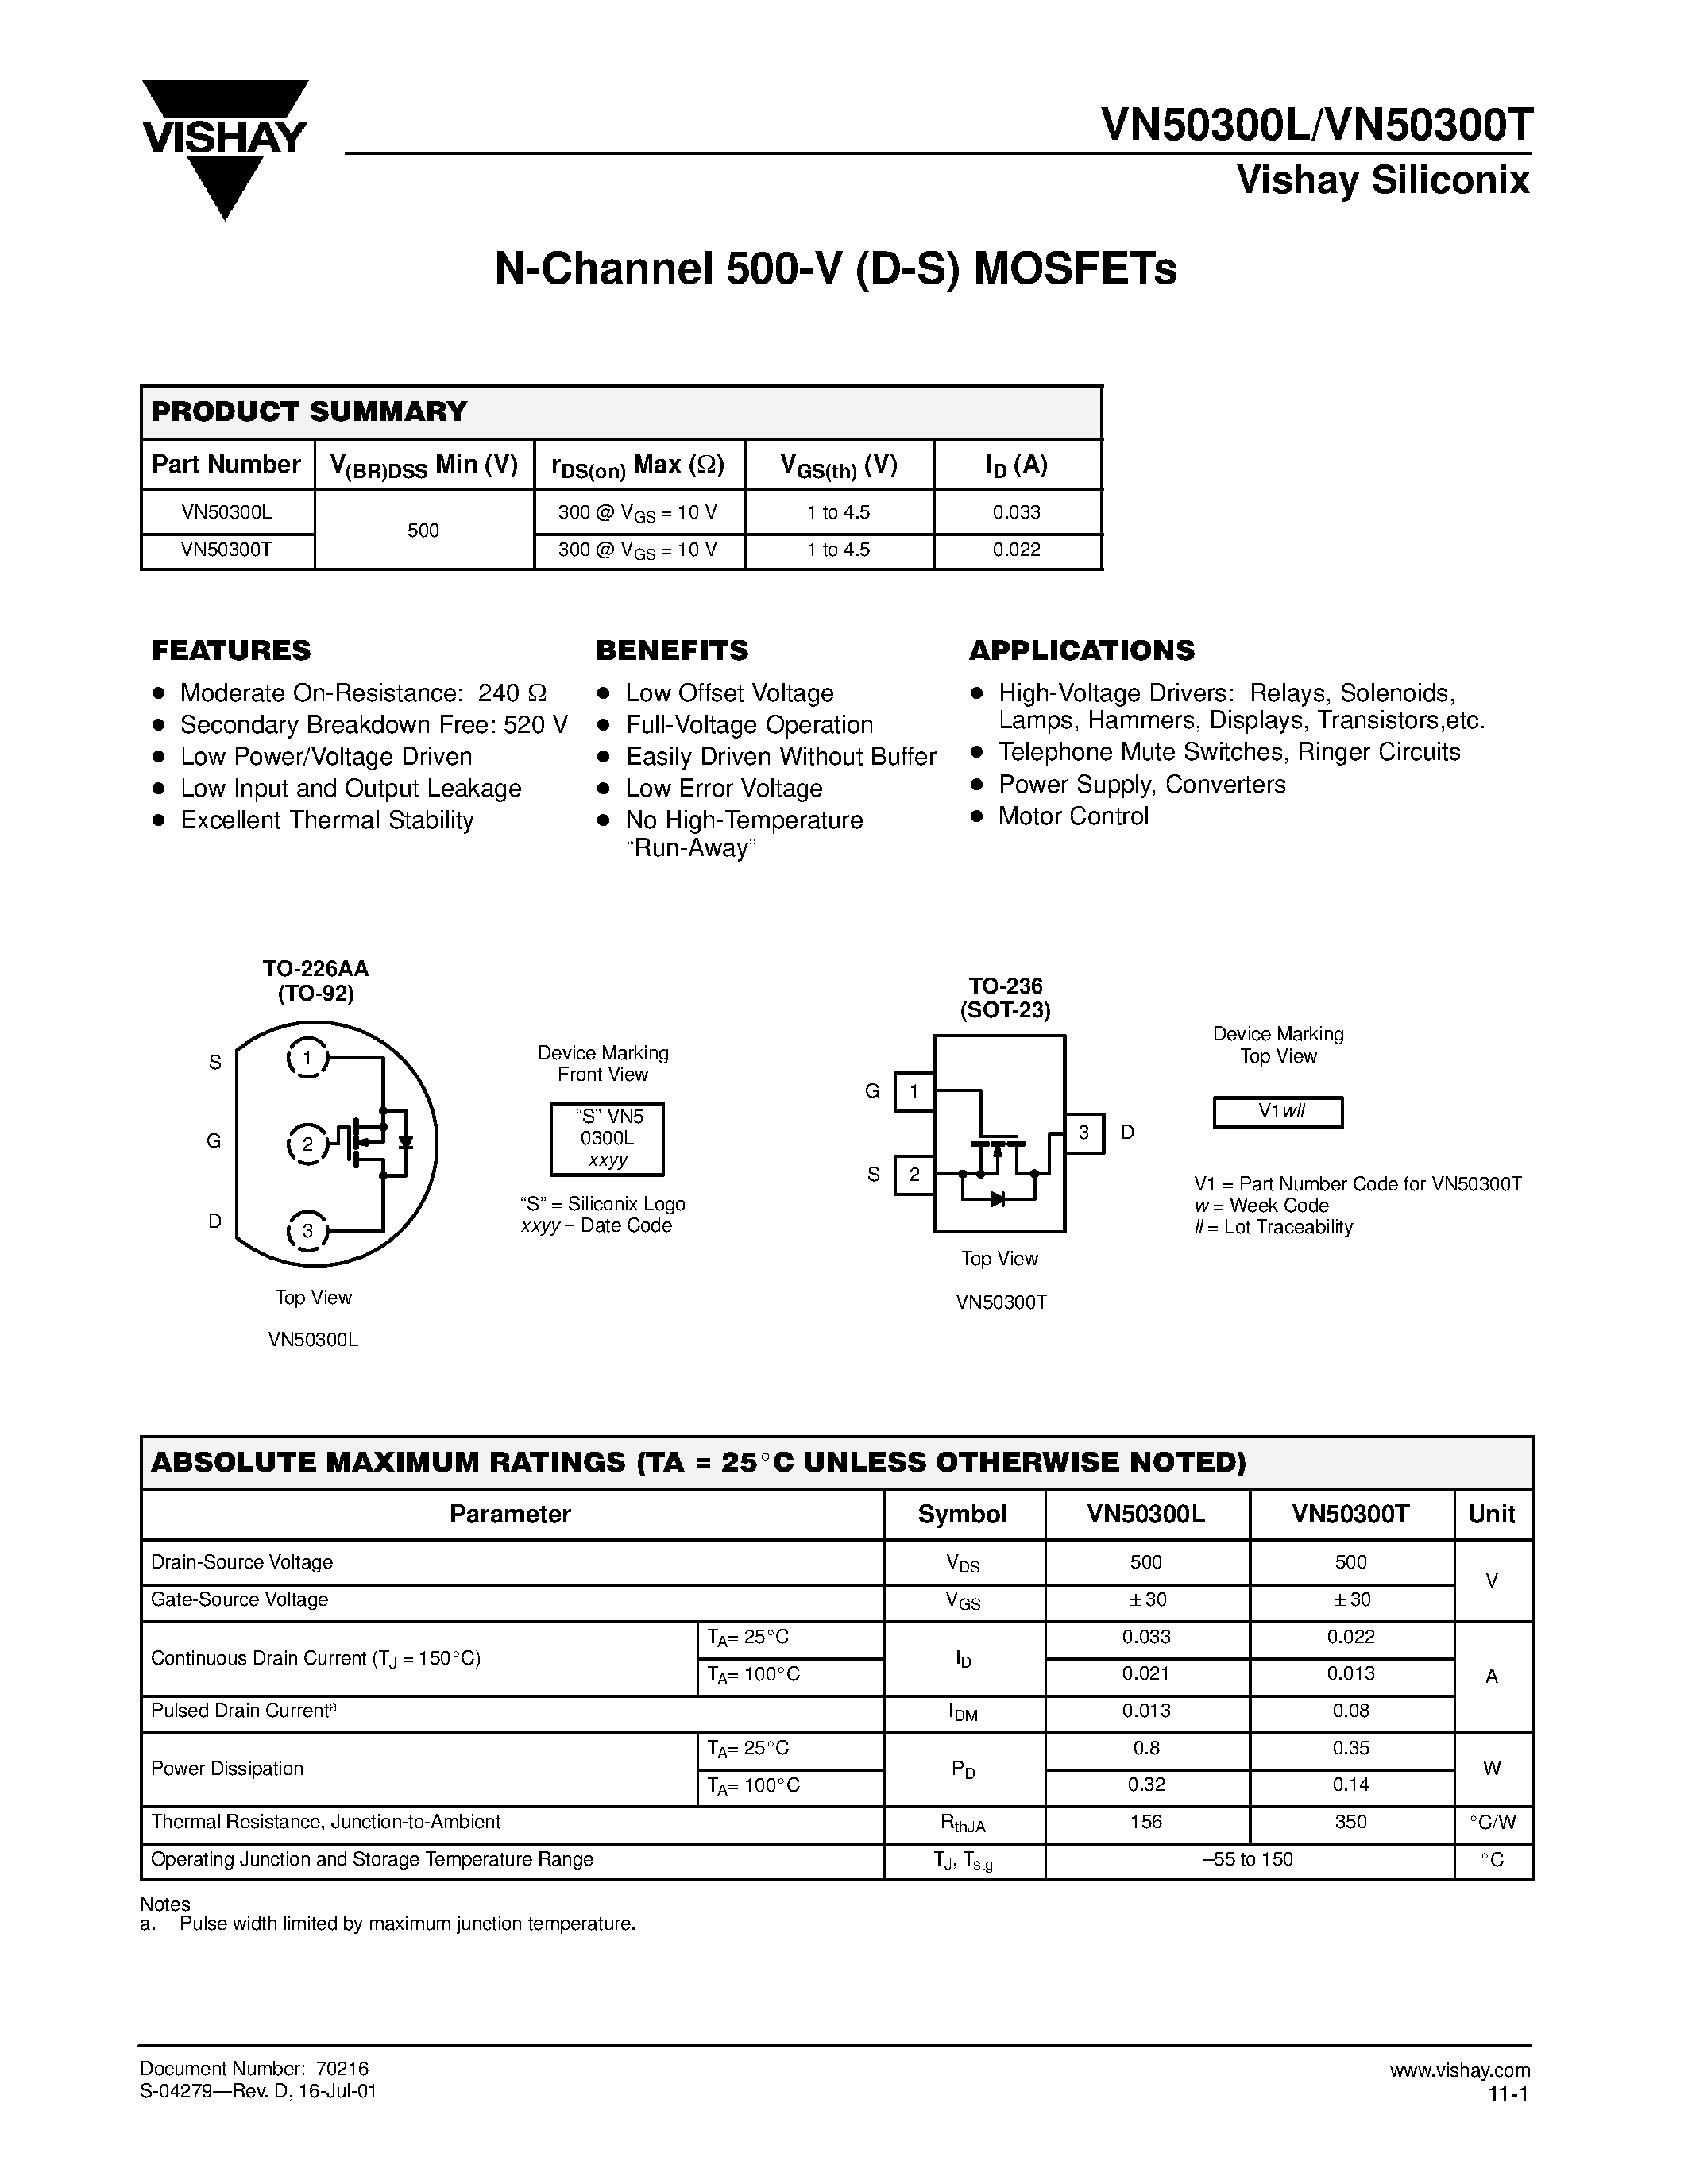 Datasheet VN50300T - N-Channel 500-V (D-S) MOSFETs page 1